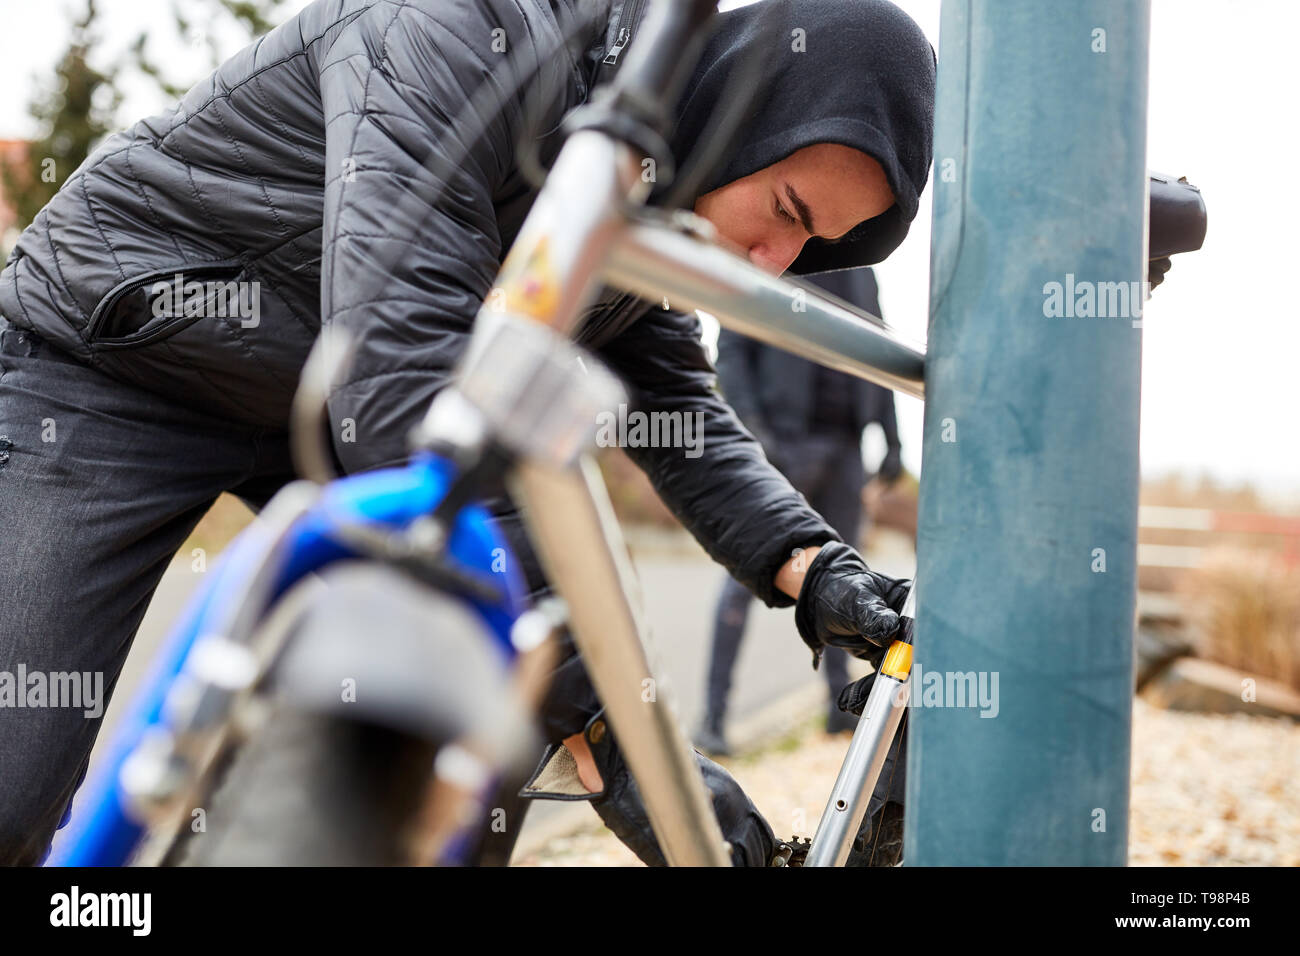 Bicycle theft in the city with thief and bike Stock Photo